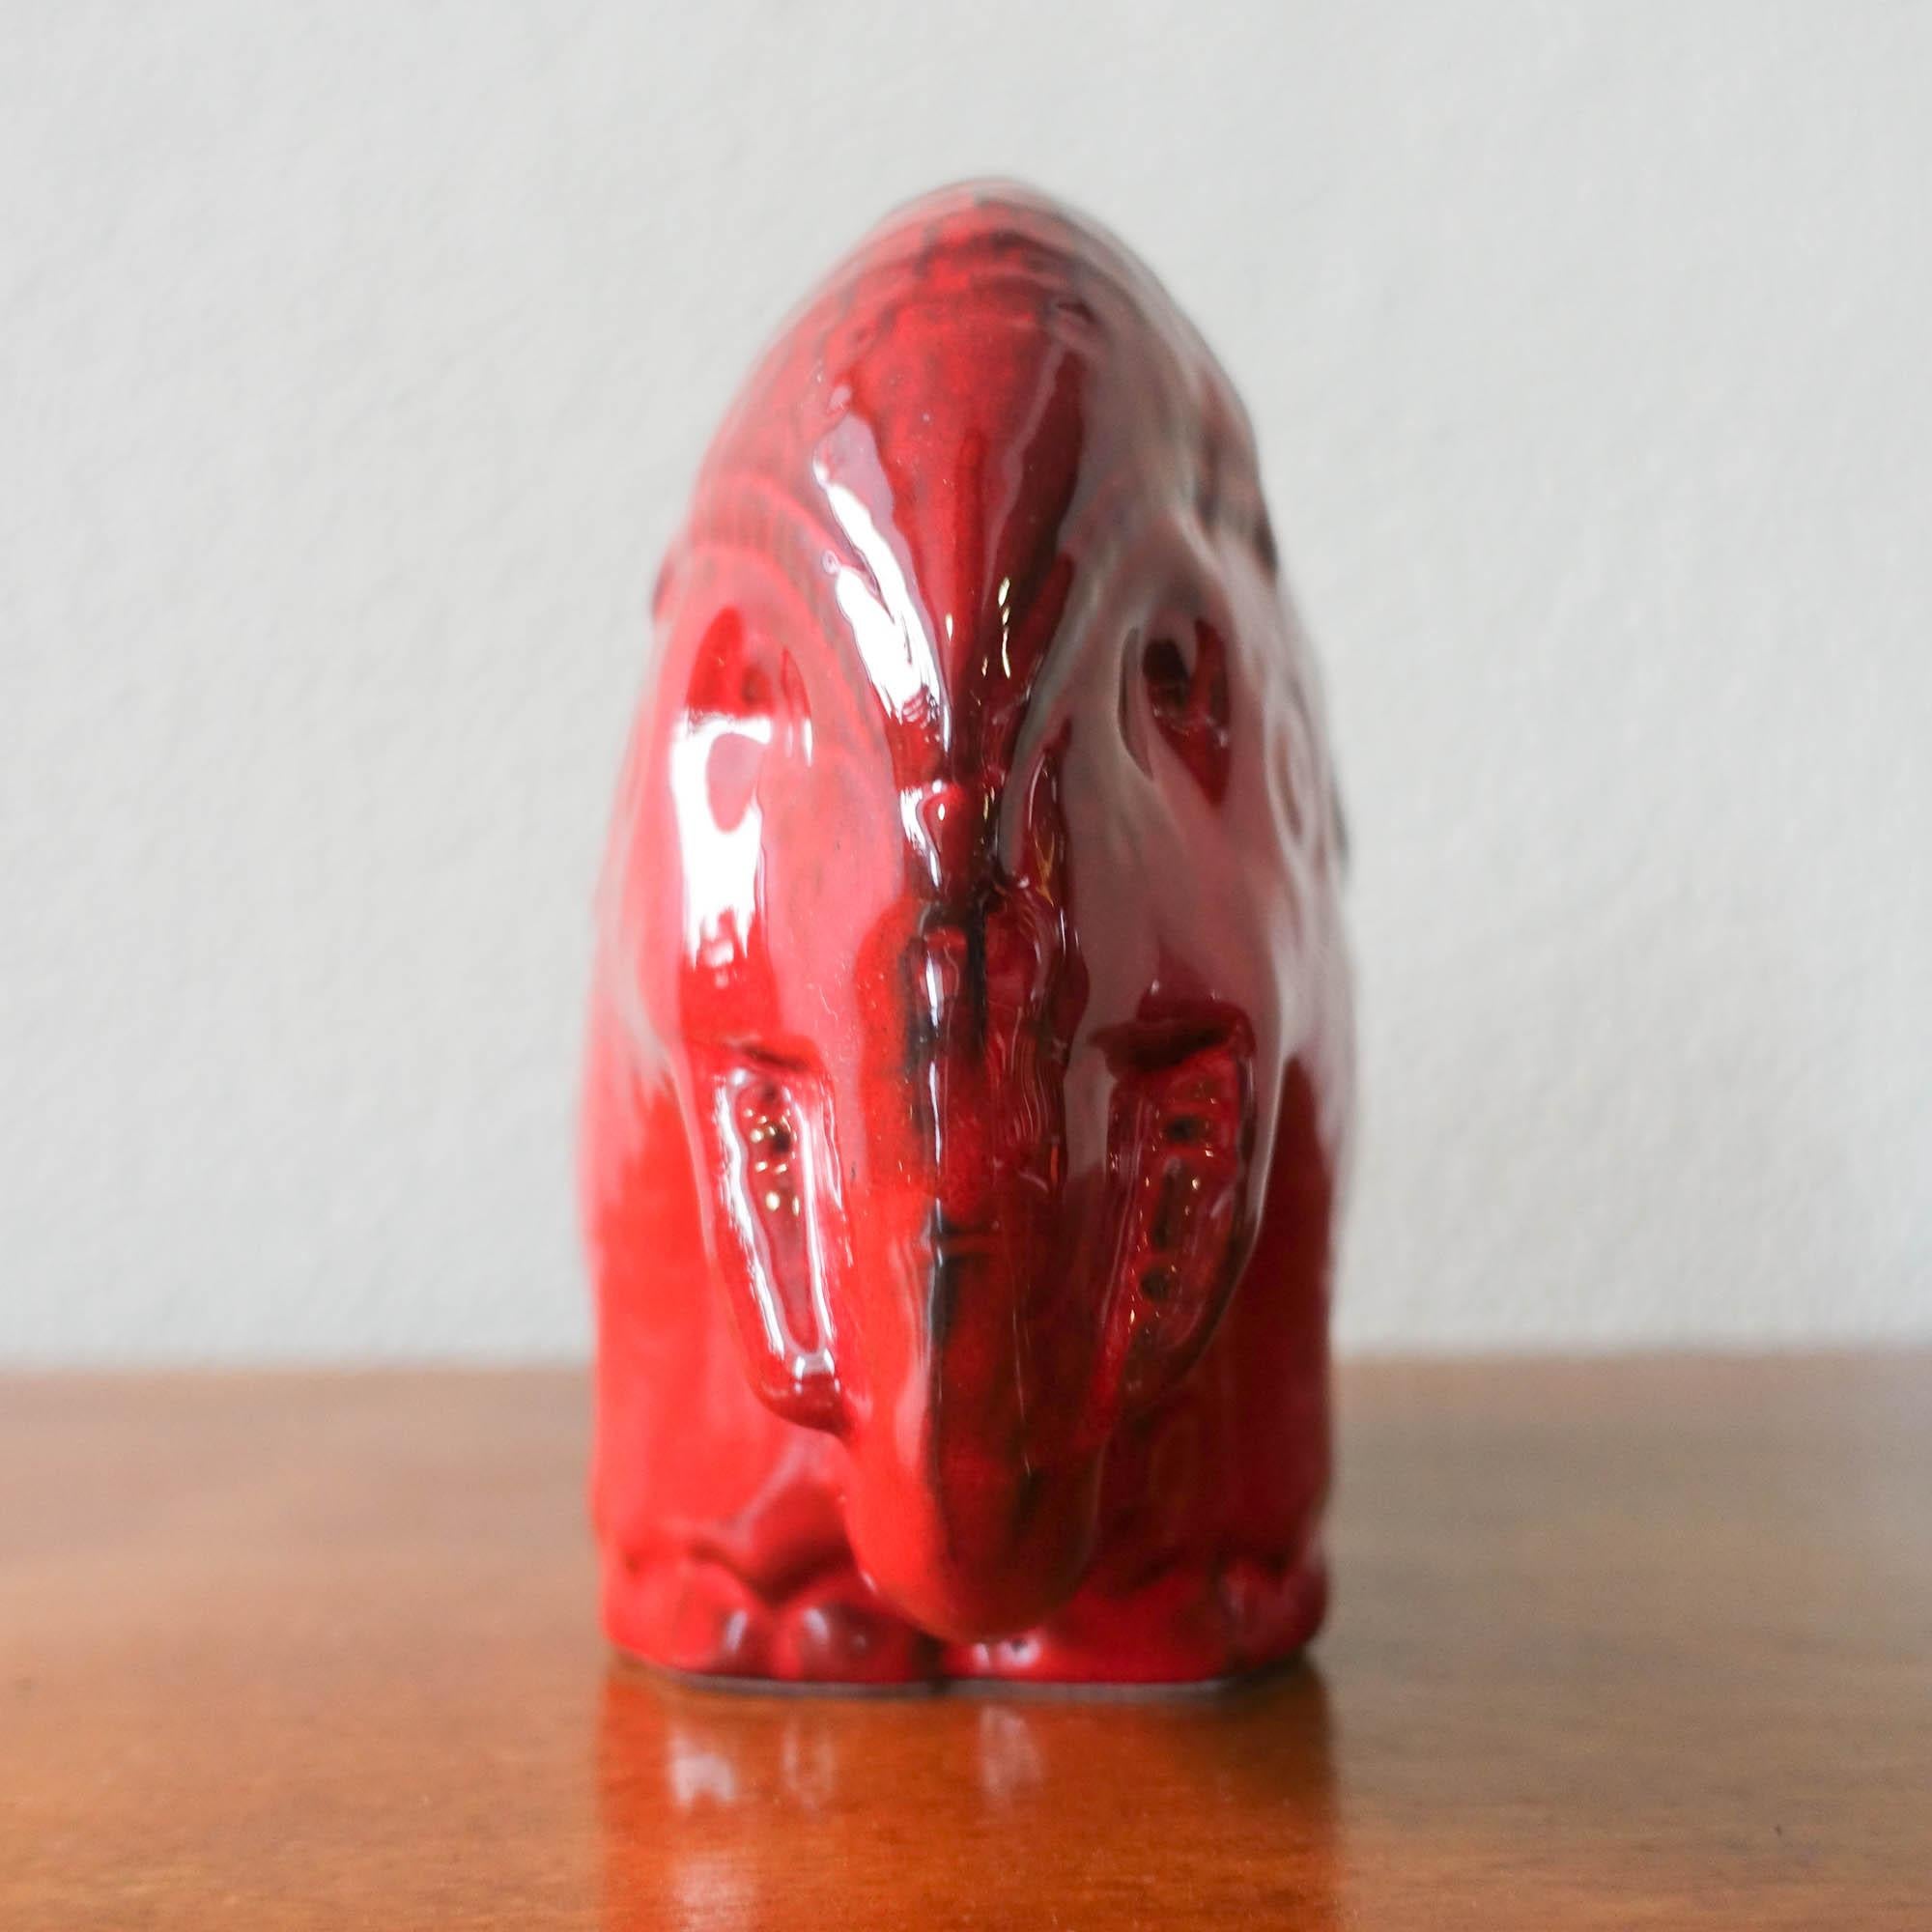 Vintage Red Glaze Ceramic Elephant in Bitossi Style, 1970's For Sale 2